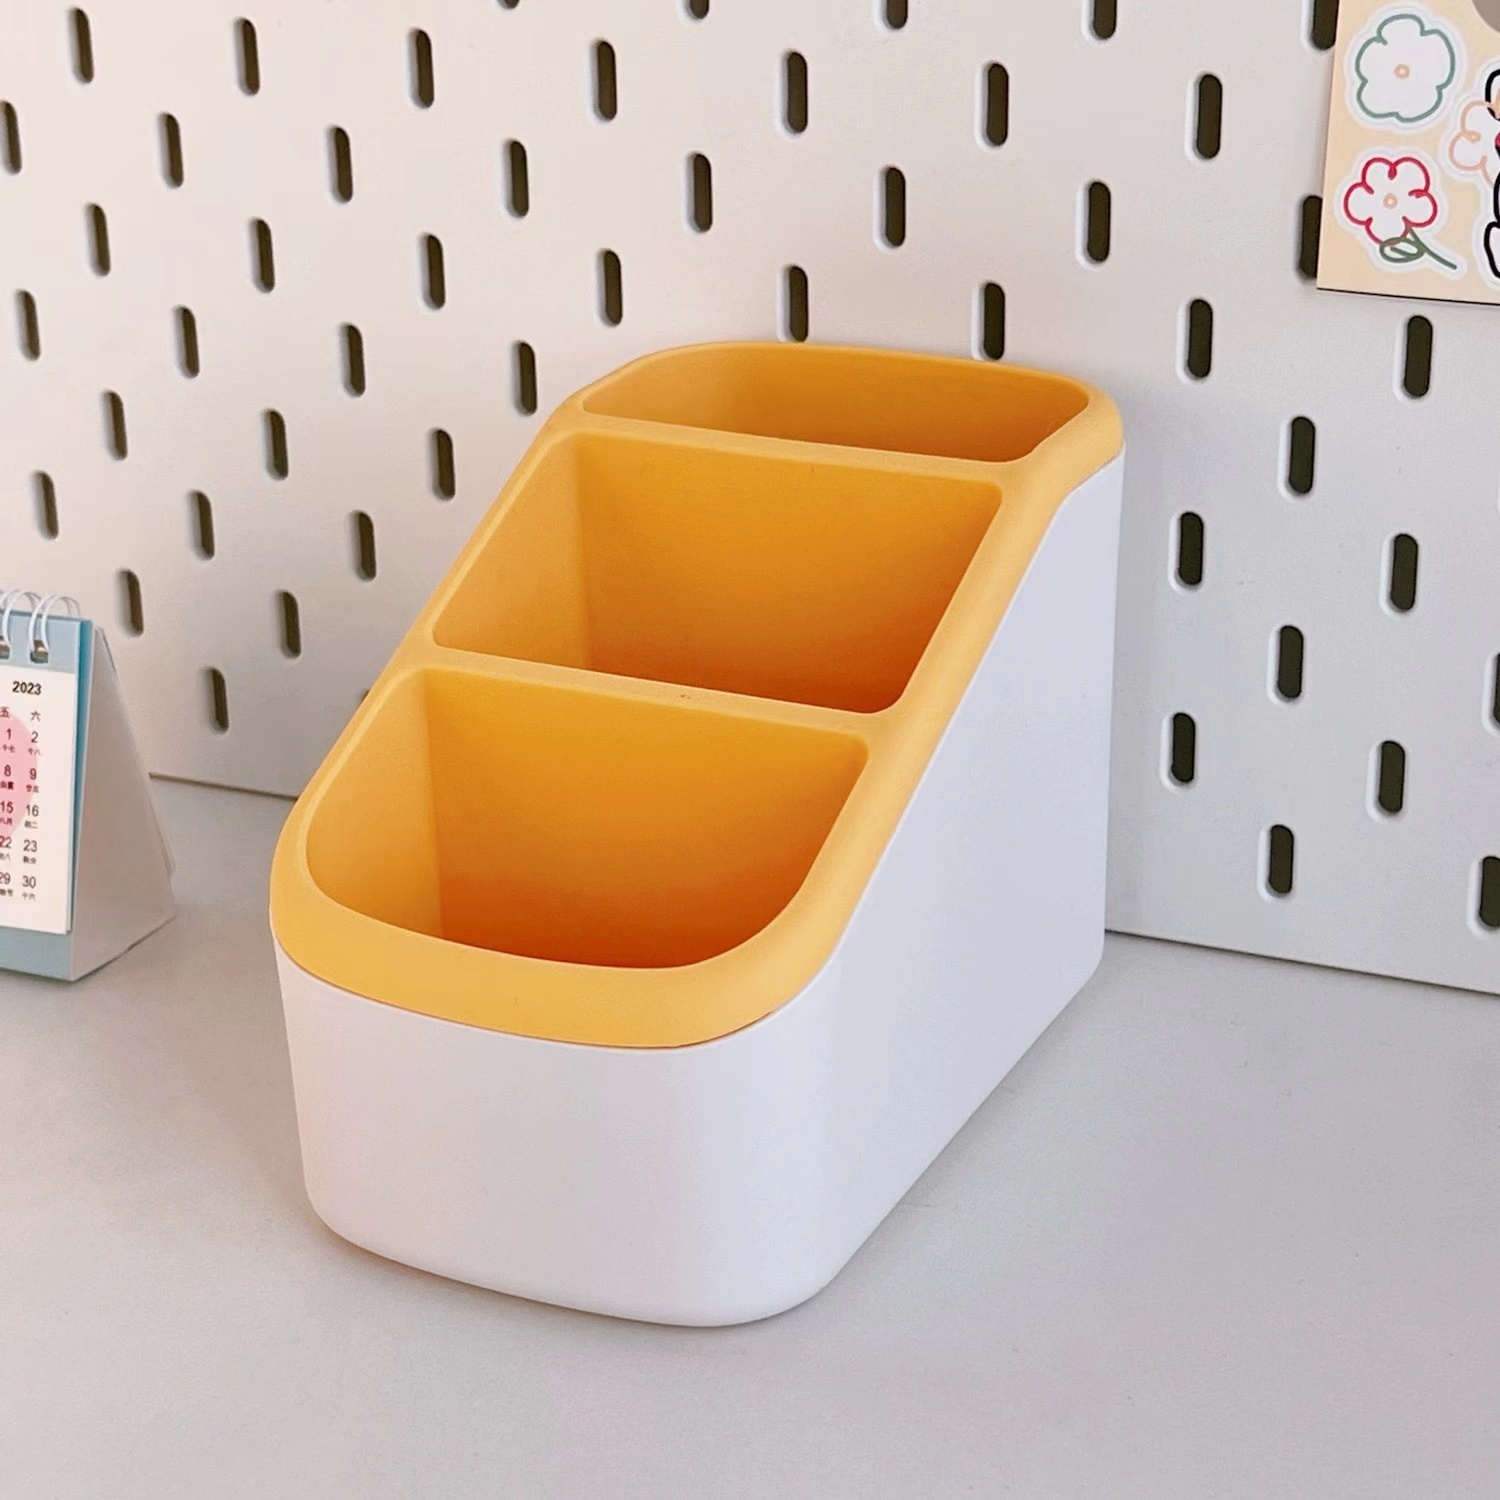 The Best Cute Desk Organizers That You Can Buy on  – StyleCaster